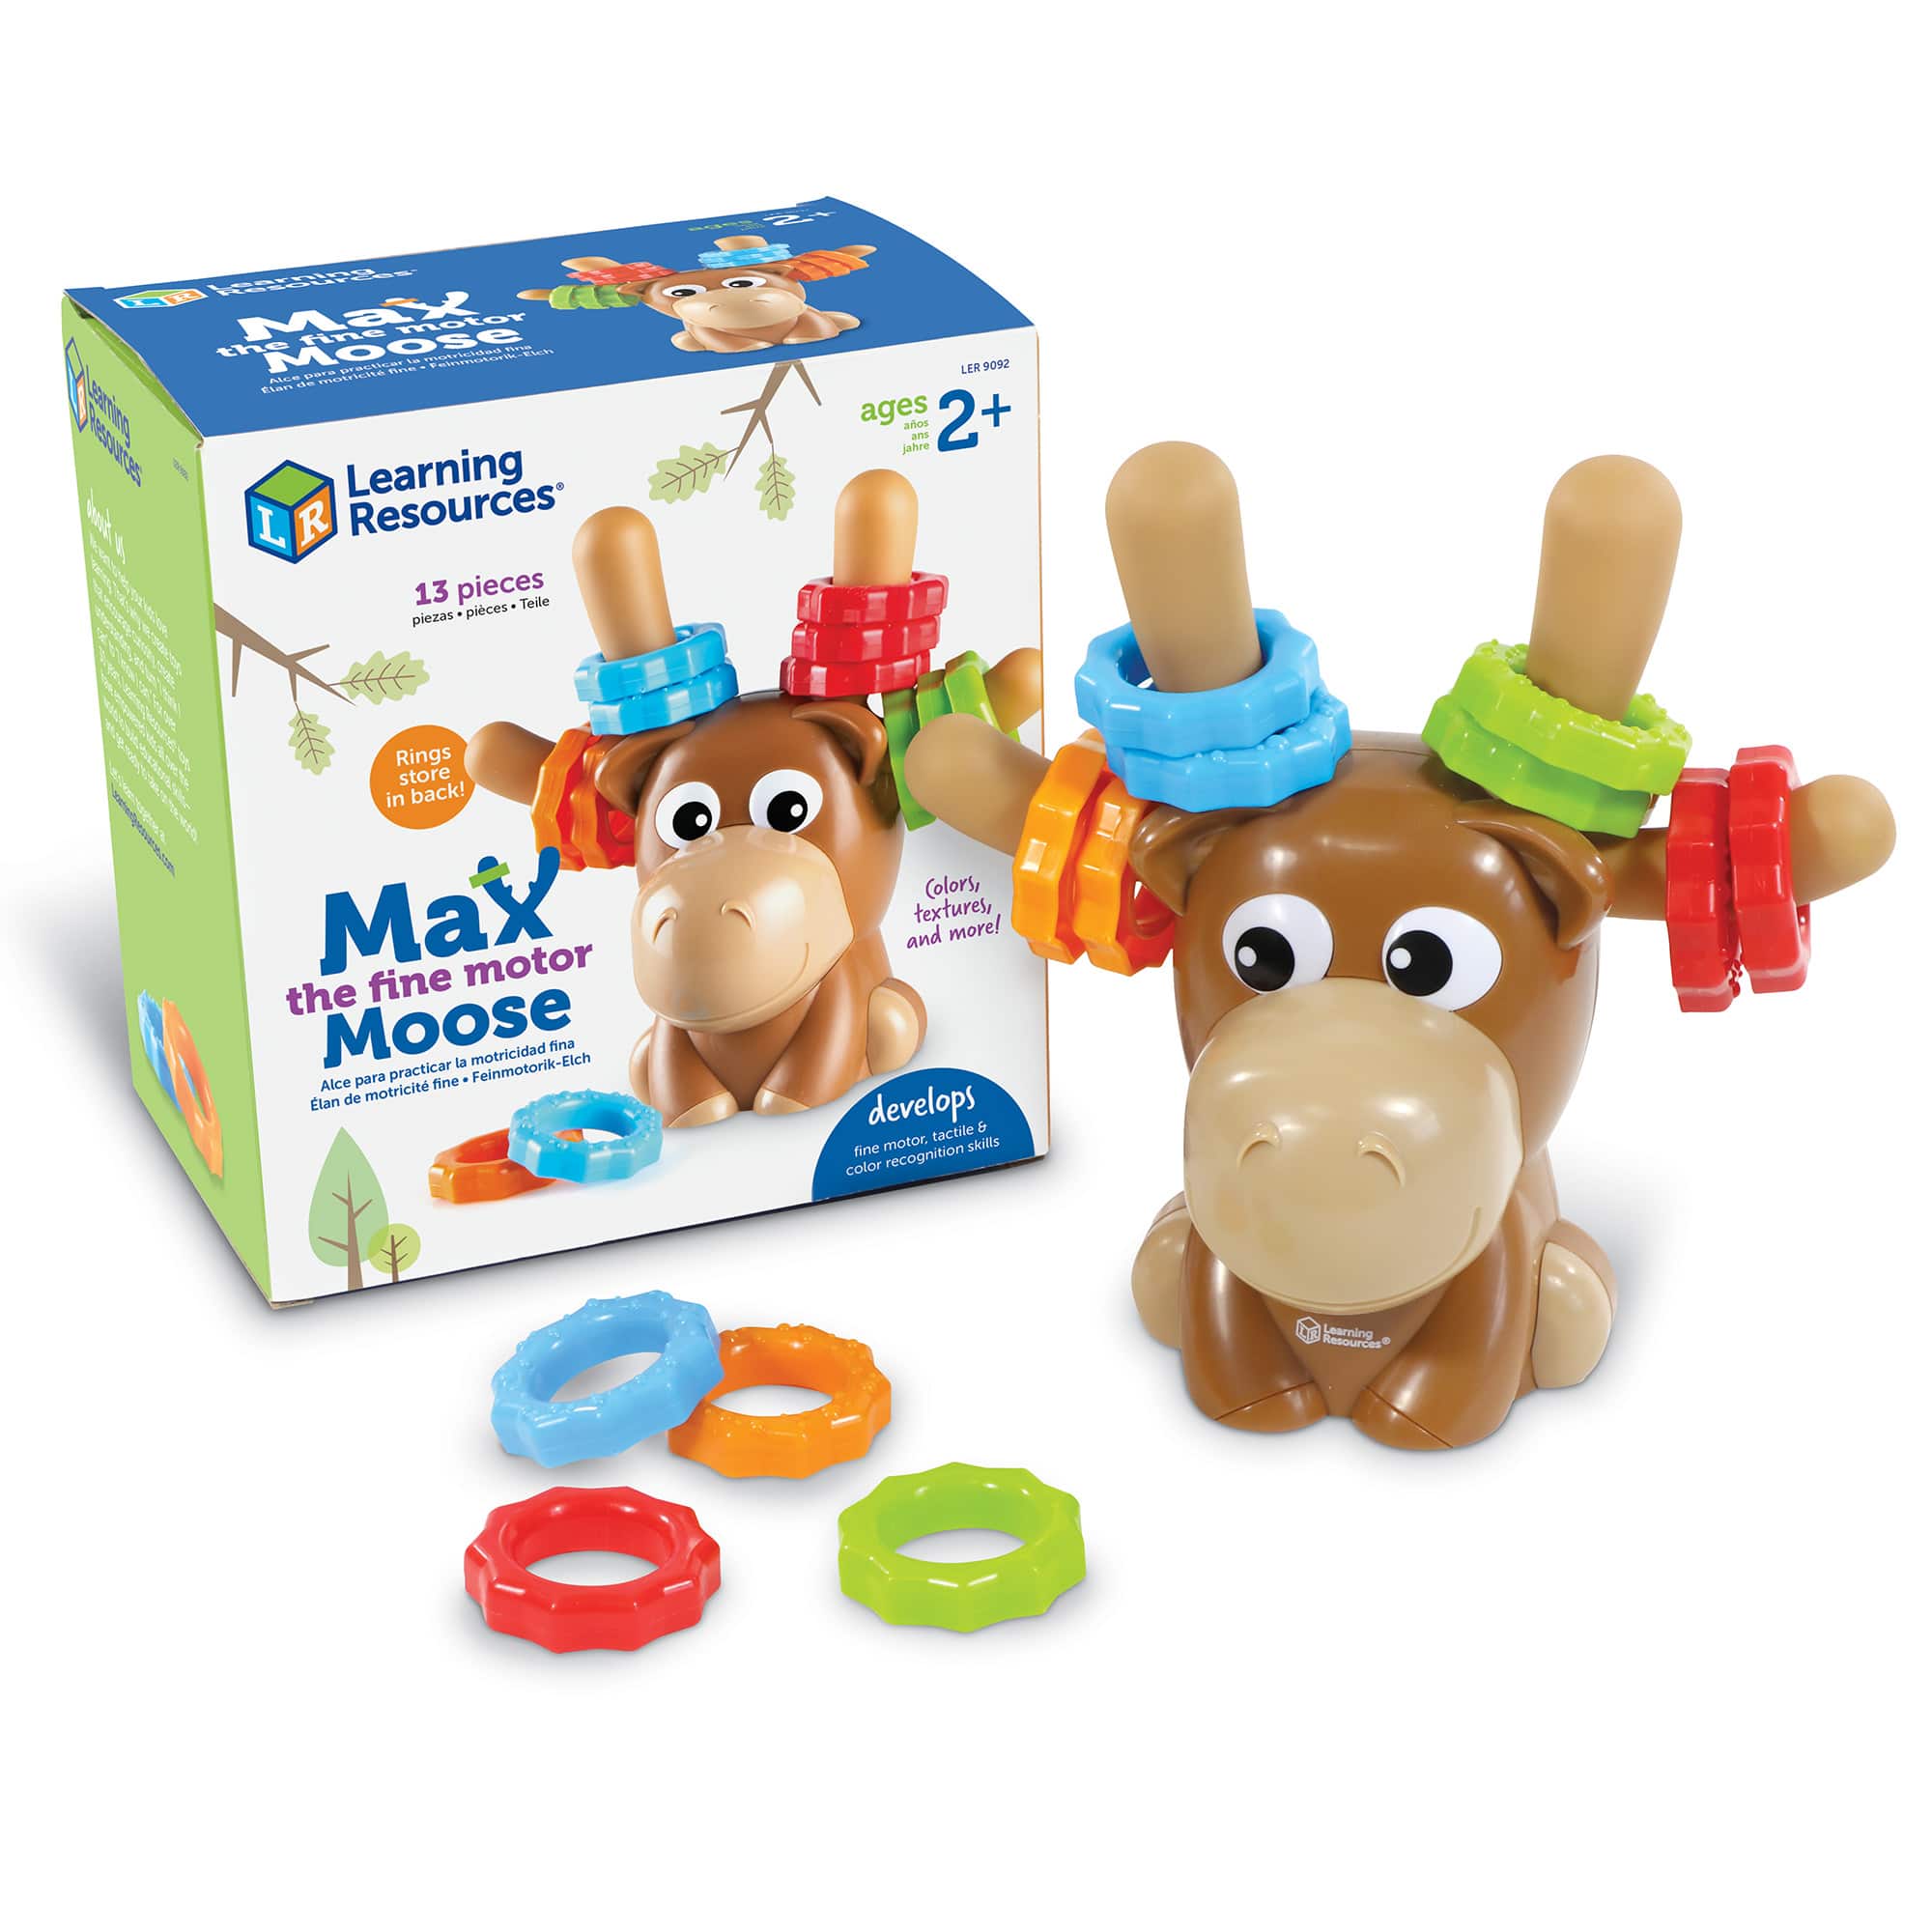 Learning Resources Max the Fine Motor Moose